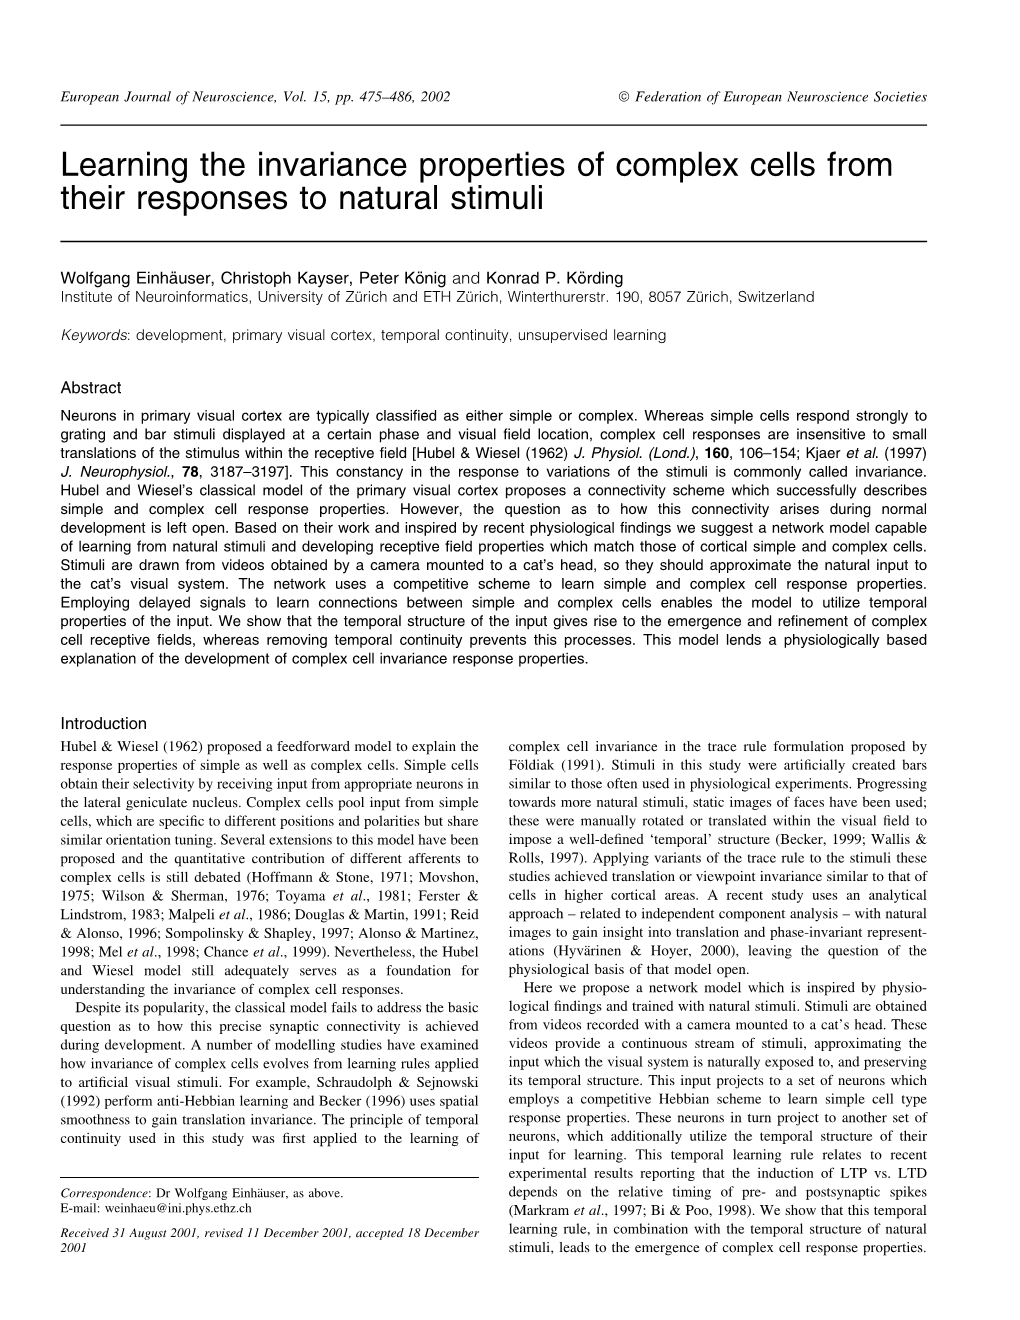 Learning the Invariance Properties of Complex Cells from Their Responses to Natural Stimuli